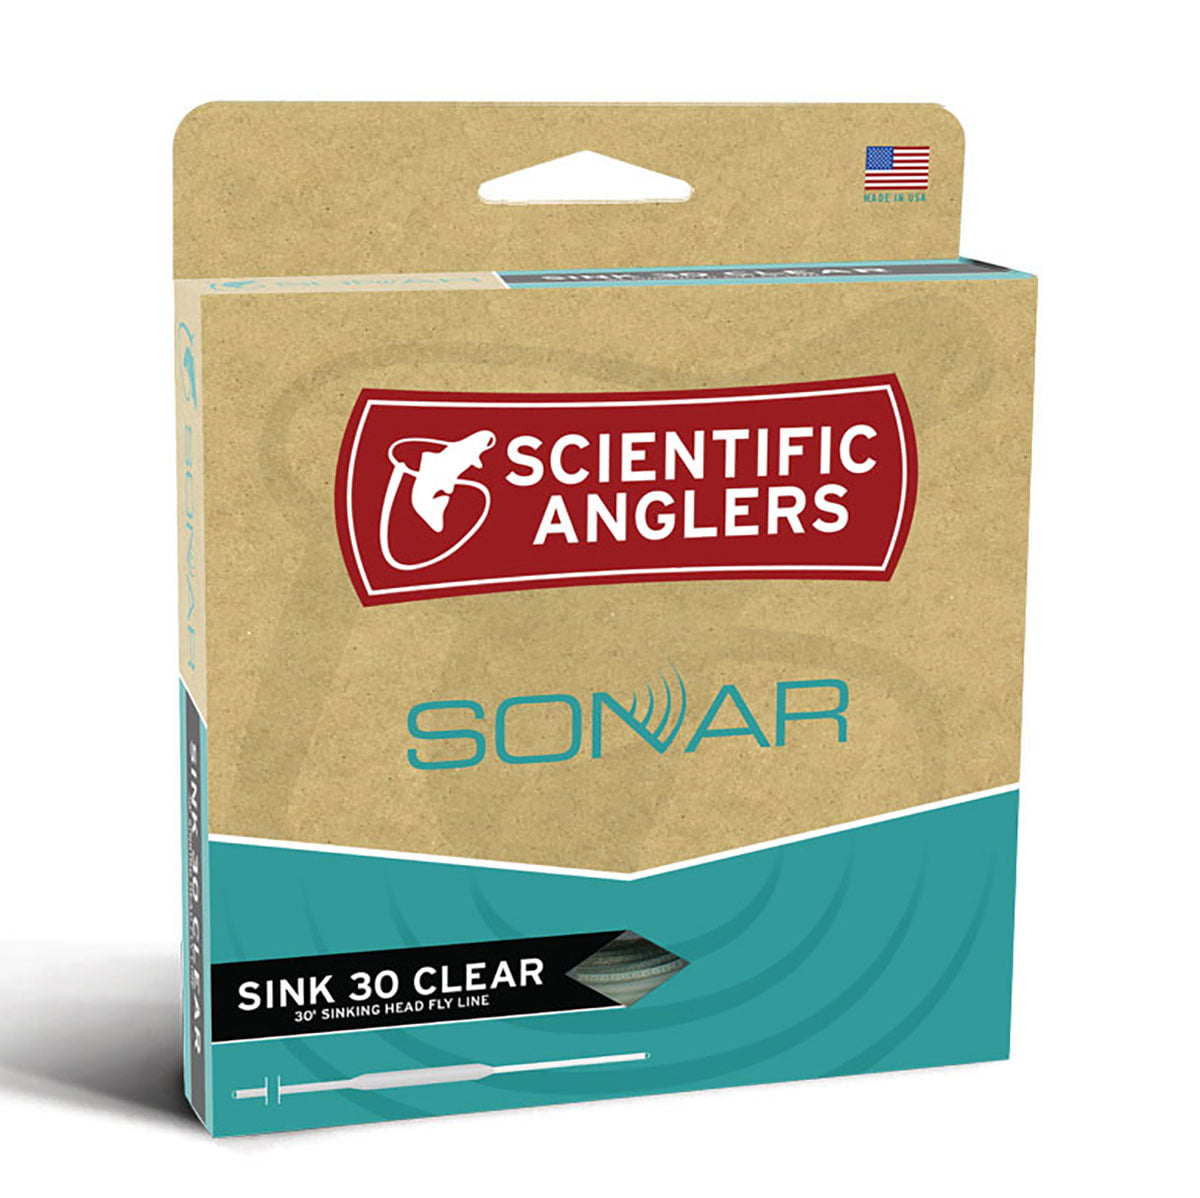 Scientific Anglers SONAR Sink 30 Clear Tip Fly Line 